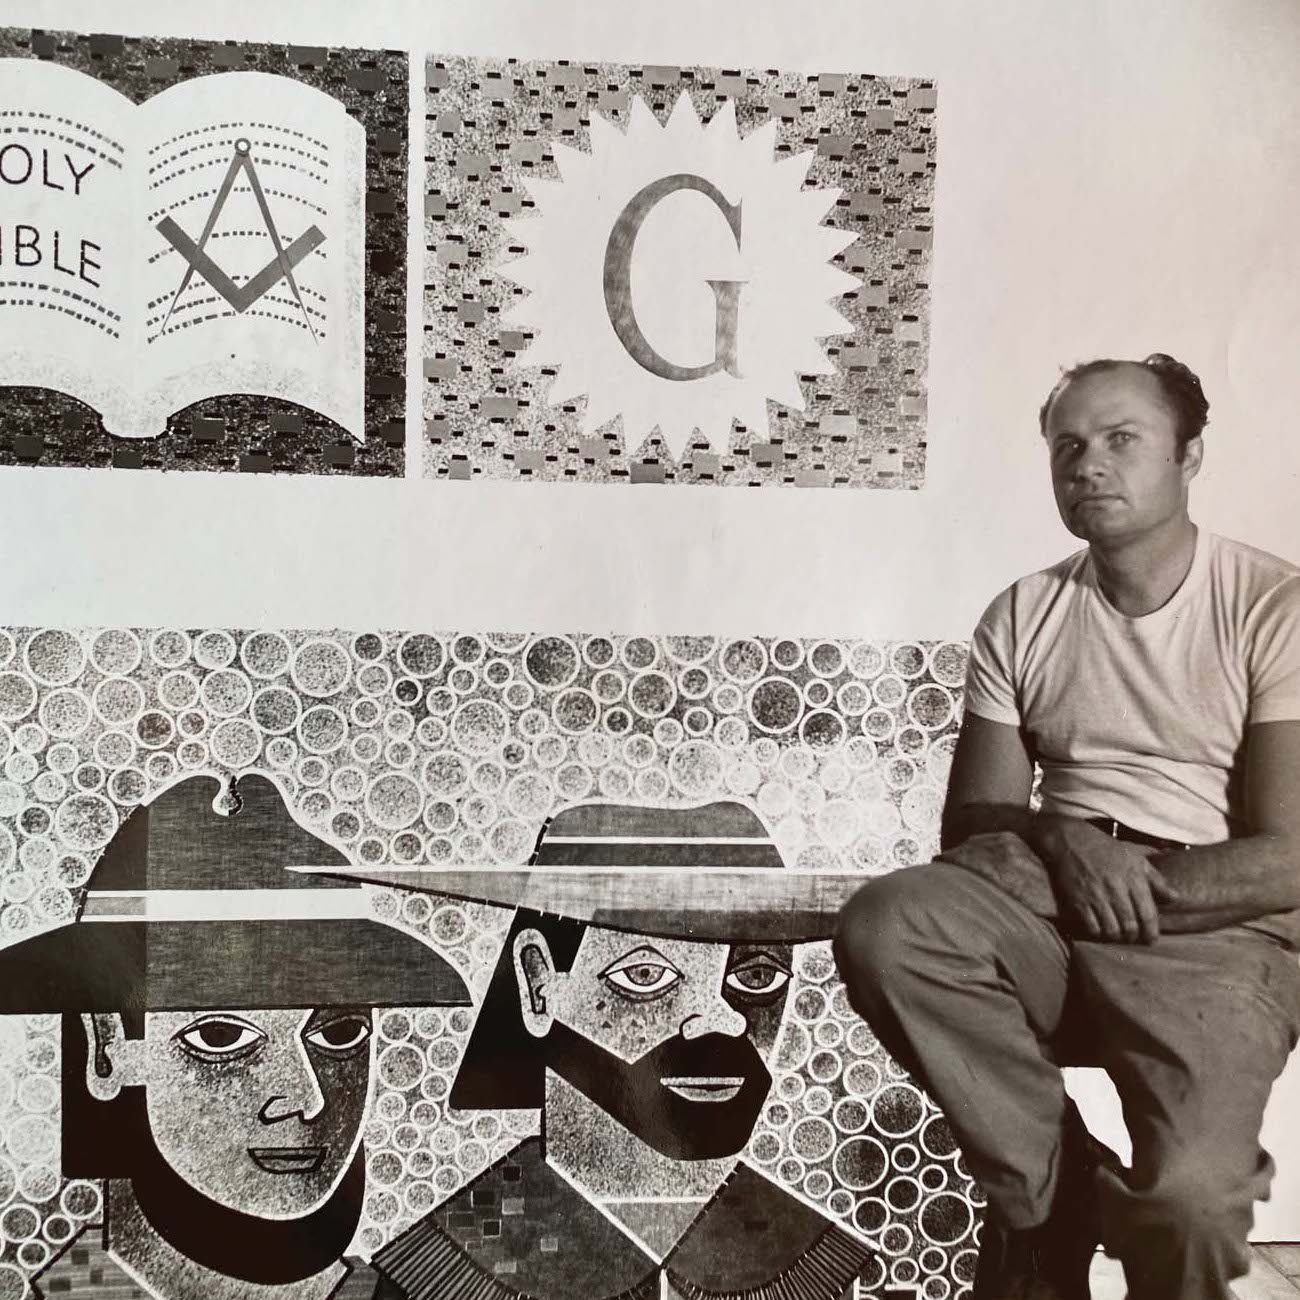 Artist Emile Norman poses with details from his endomosaic artwork, which was installed in the California Masonic Memorial Temple in 1957